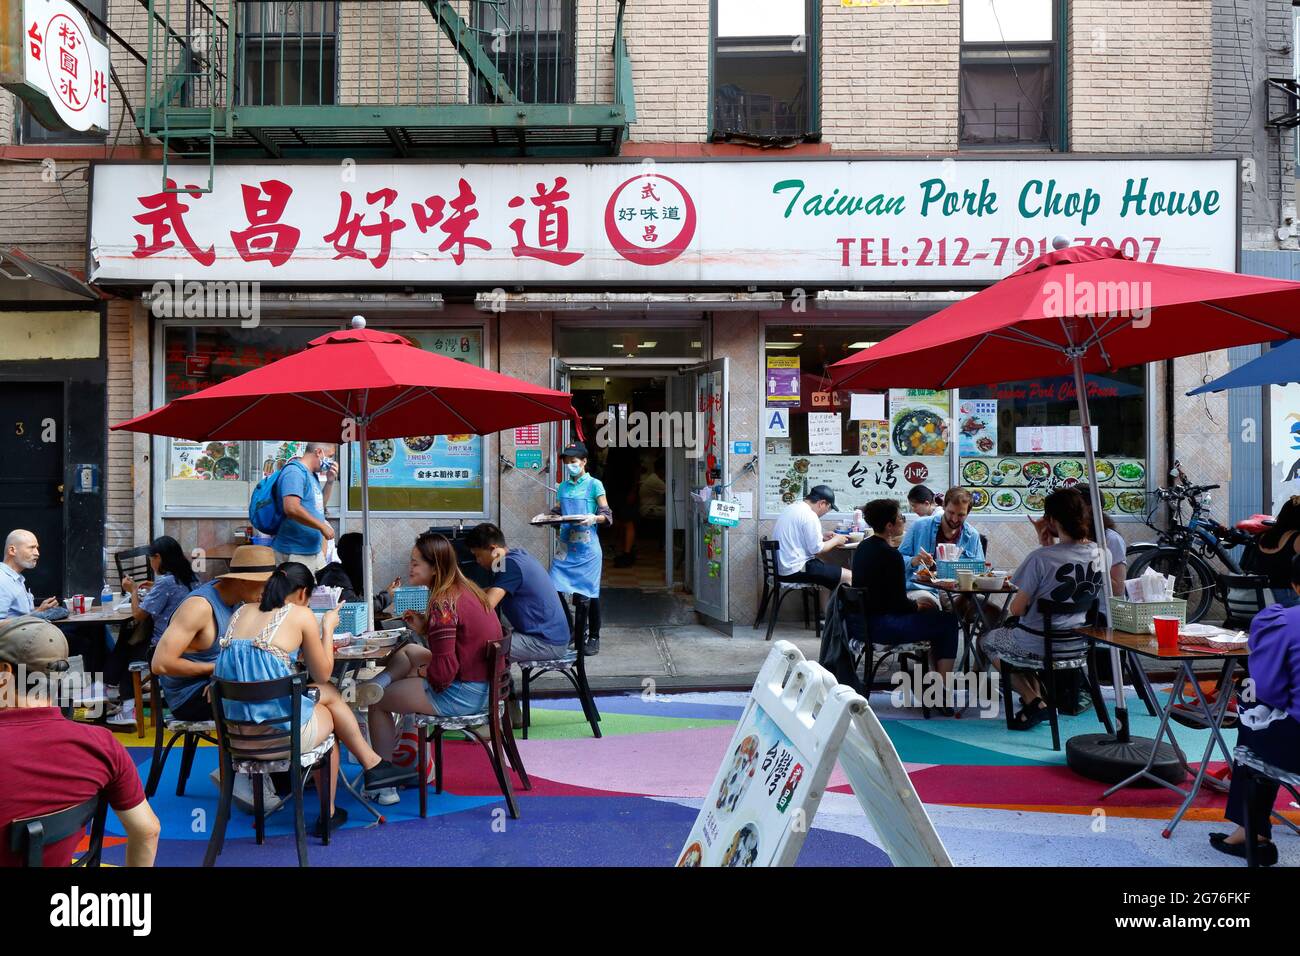 Taiwan Pork Chop House, 3 Doyers St, New York, NY. exterior storefront of a Chinese restaurant in Manhattan Chinatown. Stock Photo